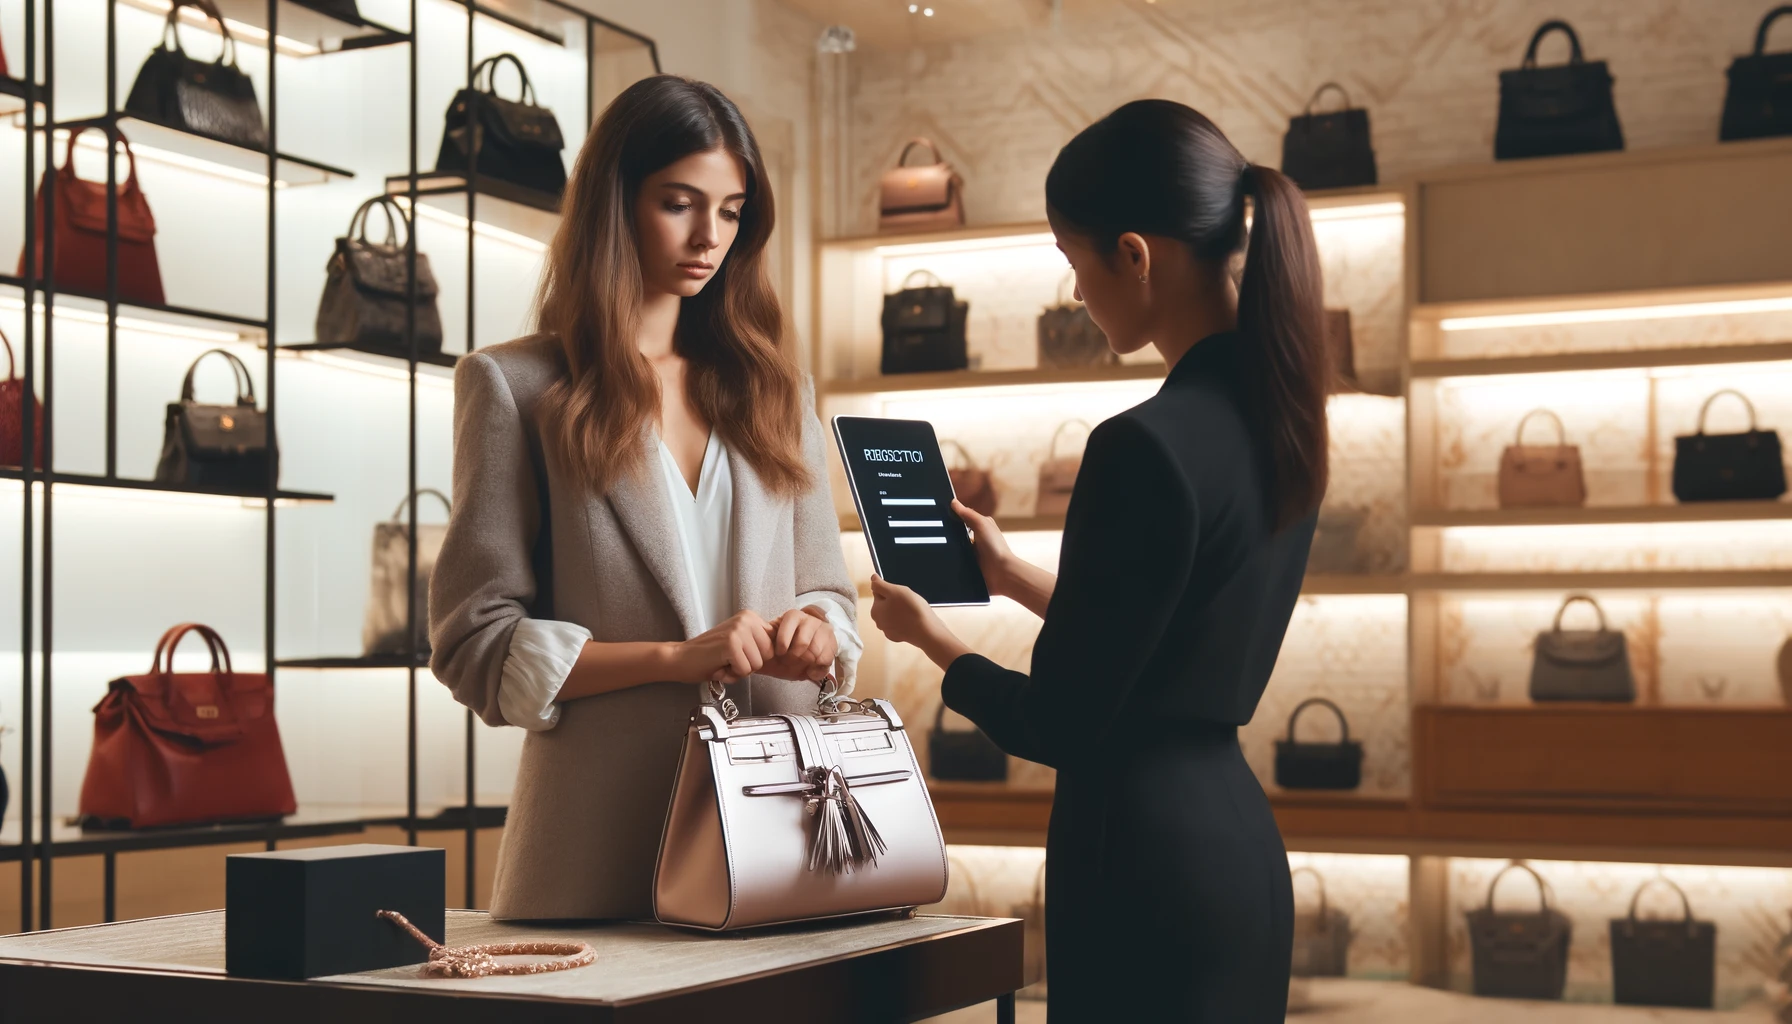 A disappointed customer at a brand handbag rental service boutique after failing the screening process. The scene shows a young woman standing in a stylish store, looking dejected as she reads a rejection notice on a digital tablet held by a sympathetic store clerk. The background features a variety of luxury handbags displayed on elegant shelves, highlighting the exclusivity of the service. The store's modern decor and soft lighting contrast with the customer's frustration and disappointment.